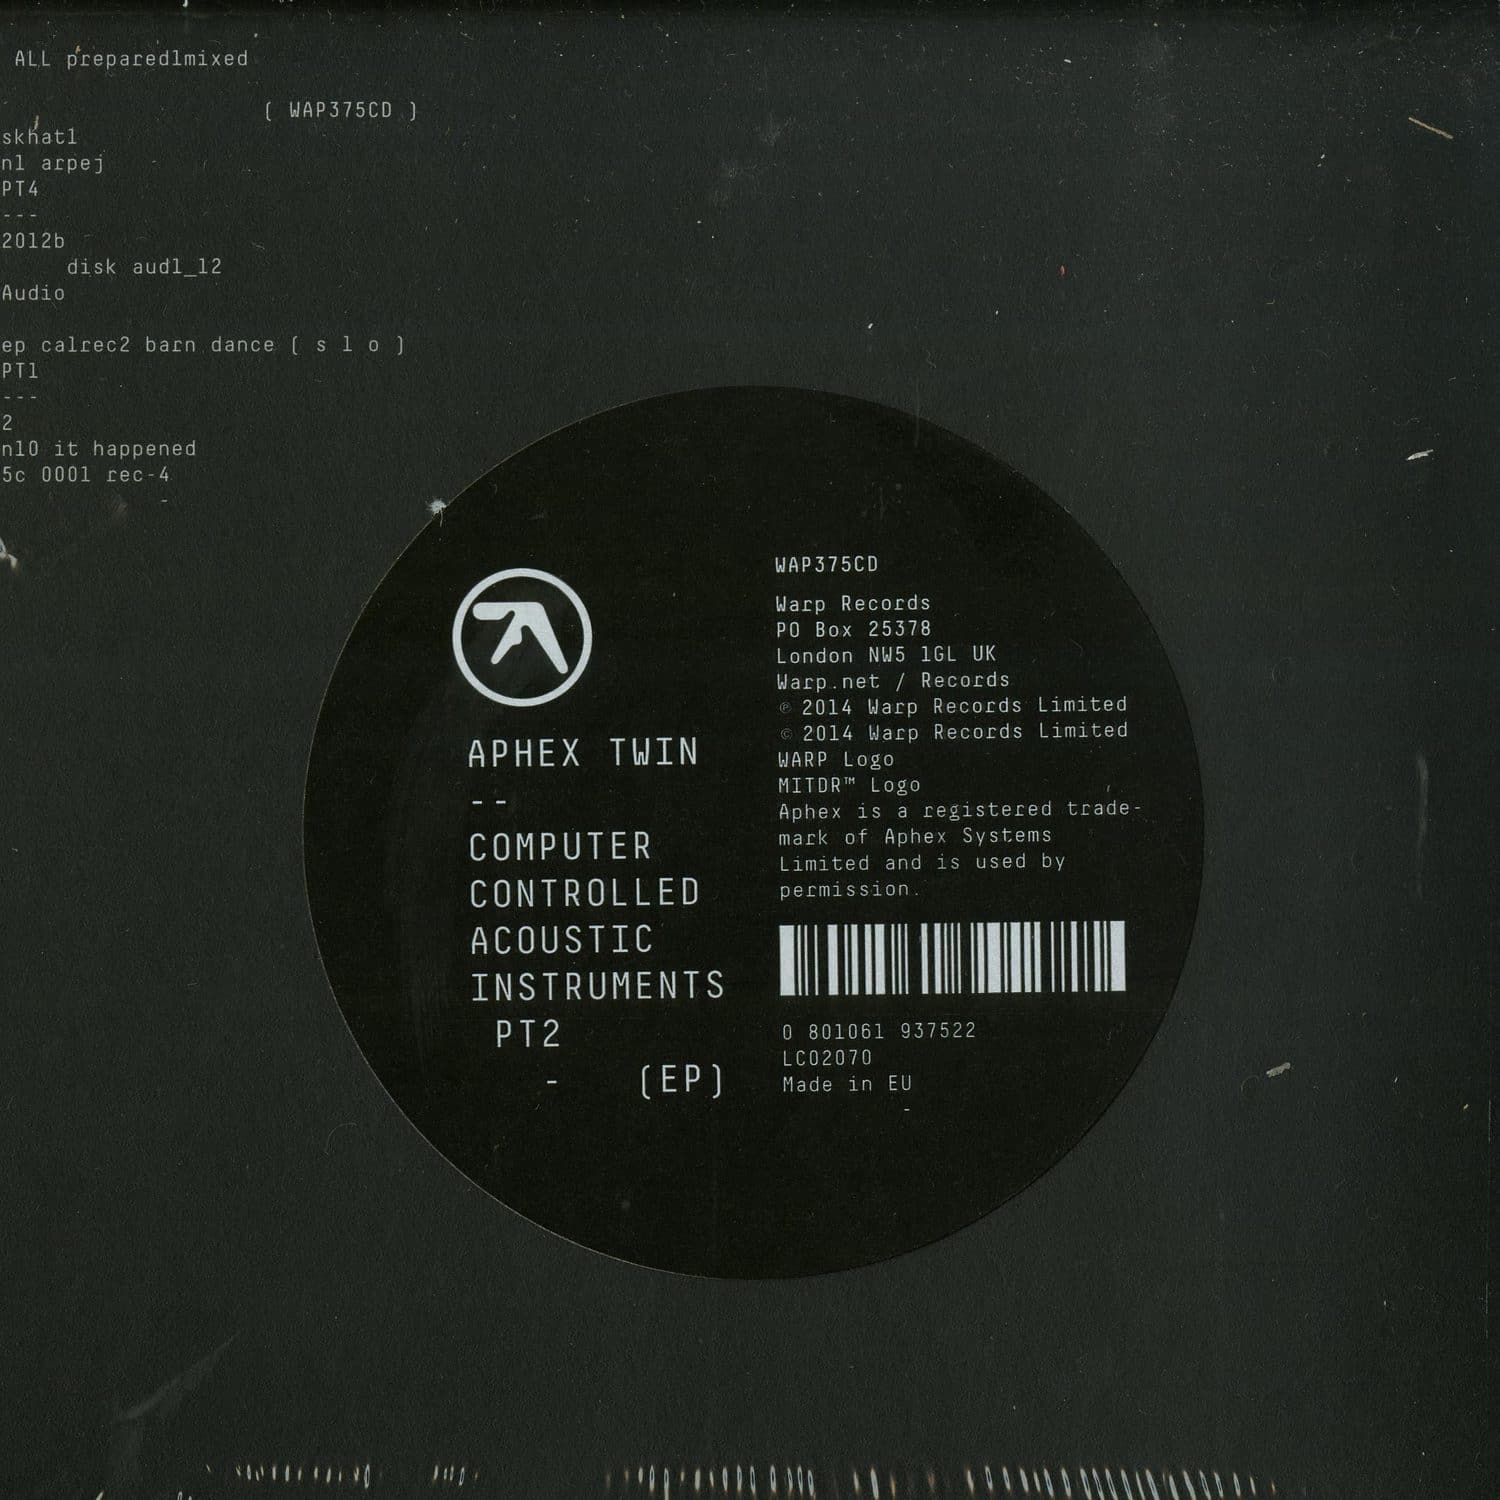 Aphex Twin - COMPUTER CONTROLLED ACOUSTIC INSTRUMENTS PT2 EP 